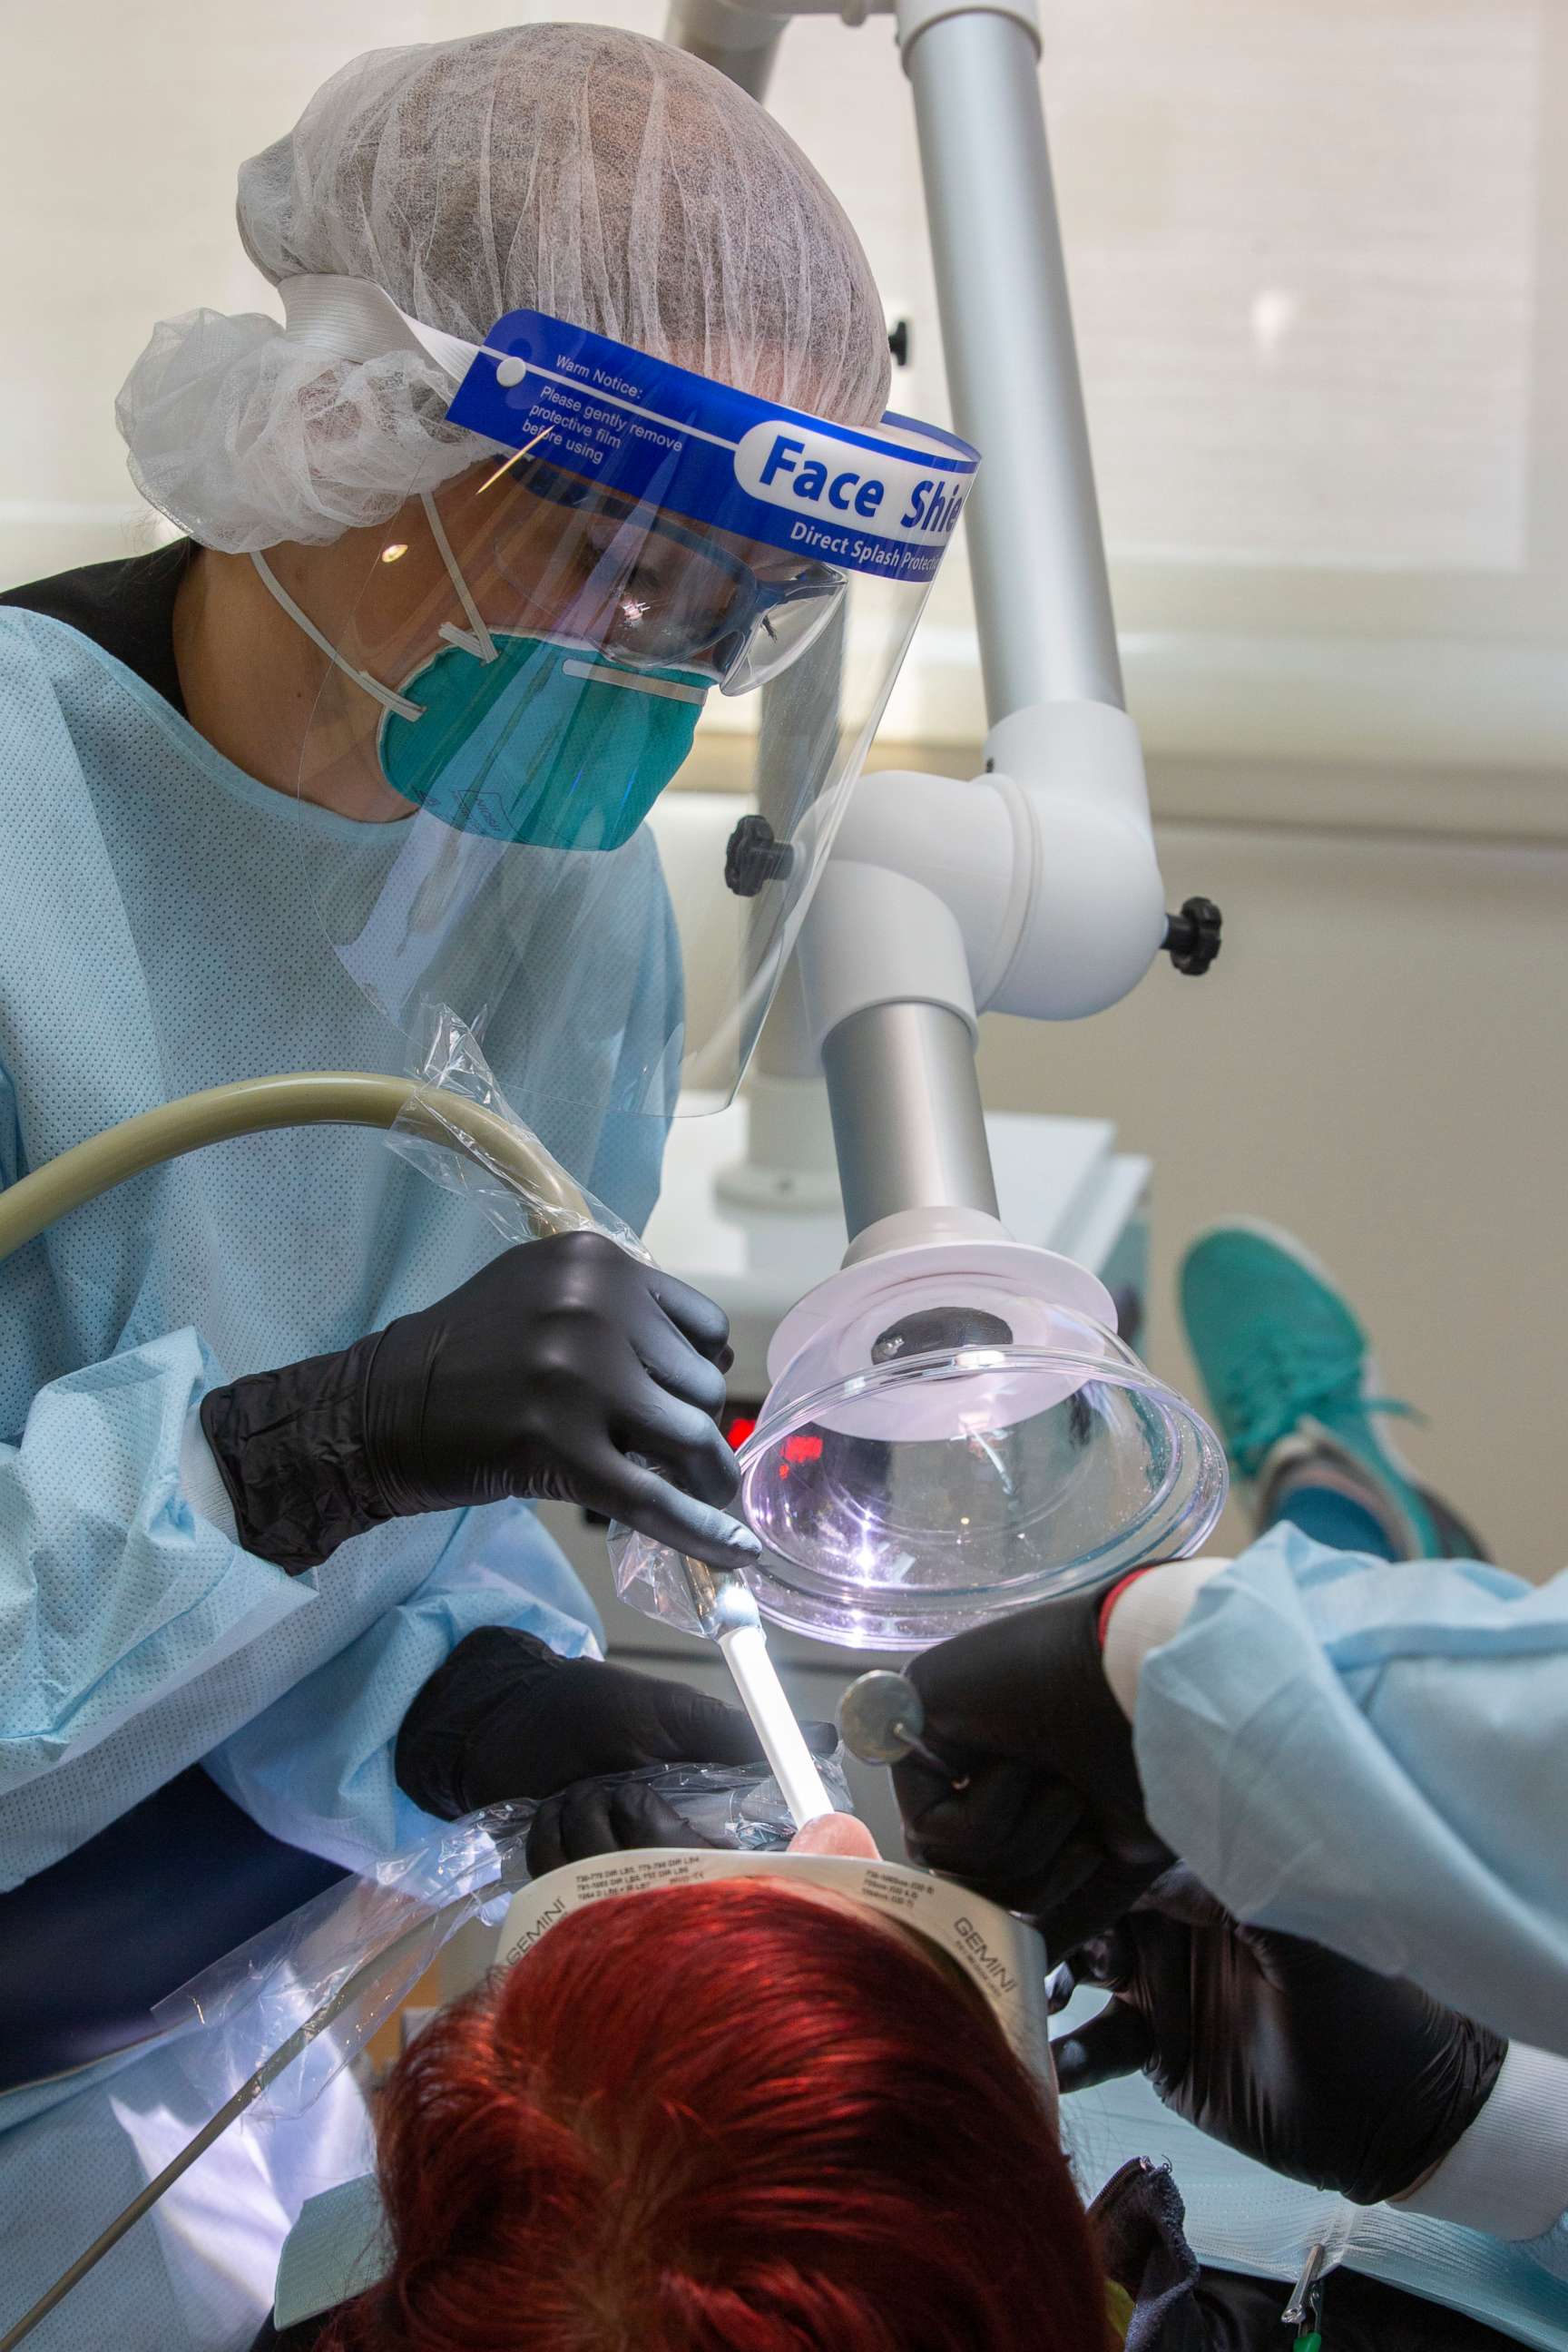 PHOTO: Dental professionals progress through a dental procedure on a patient at Bloom Dental Group on May 15, 2020, in San Mateo, Calif.